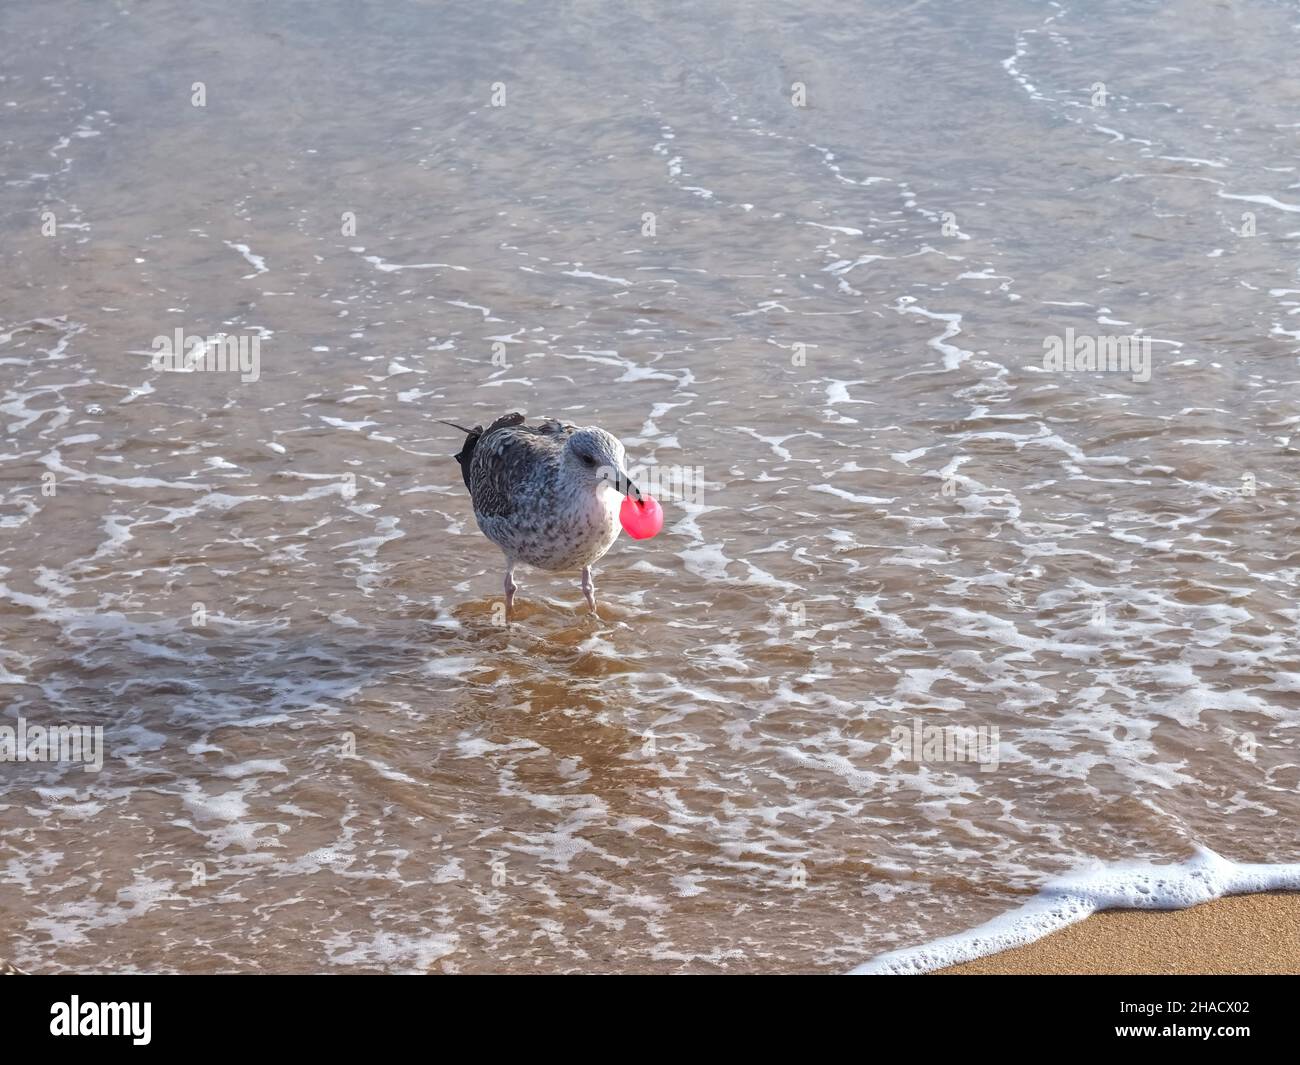 Marine pollution - a seagull with pink plastic item at the beach Stock Photo